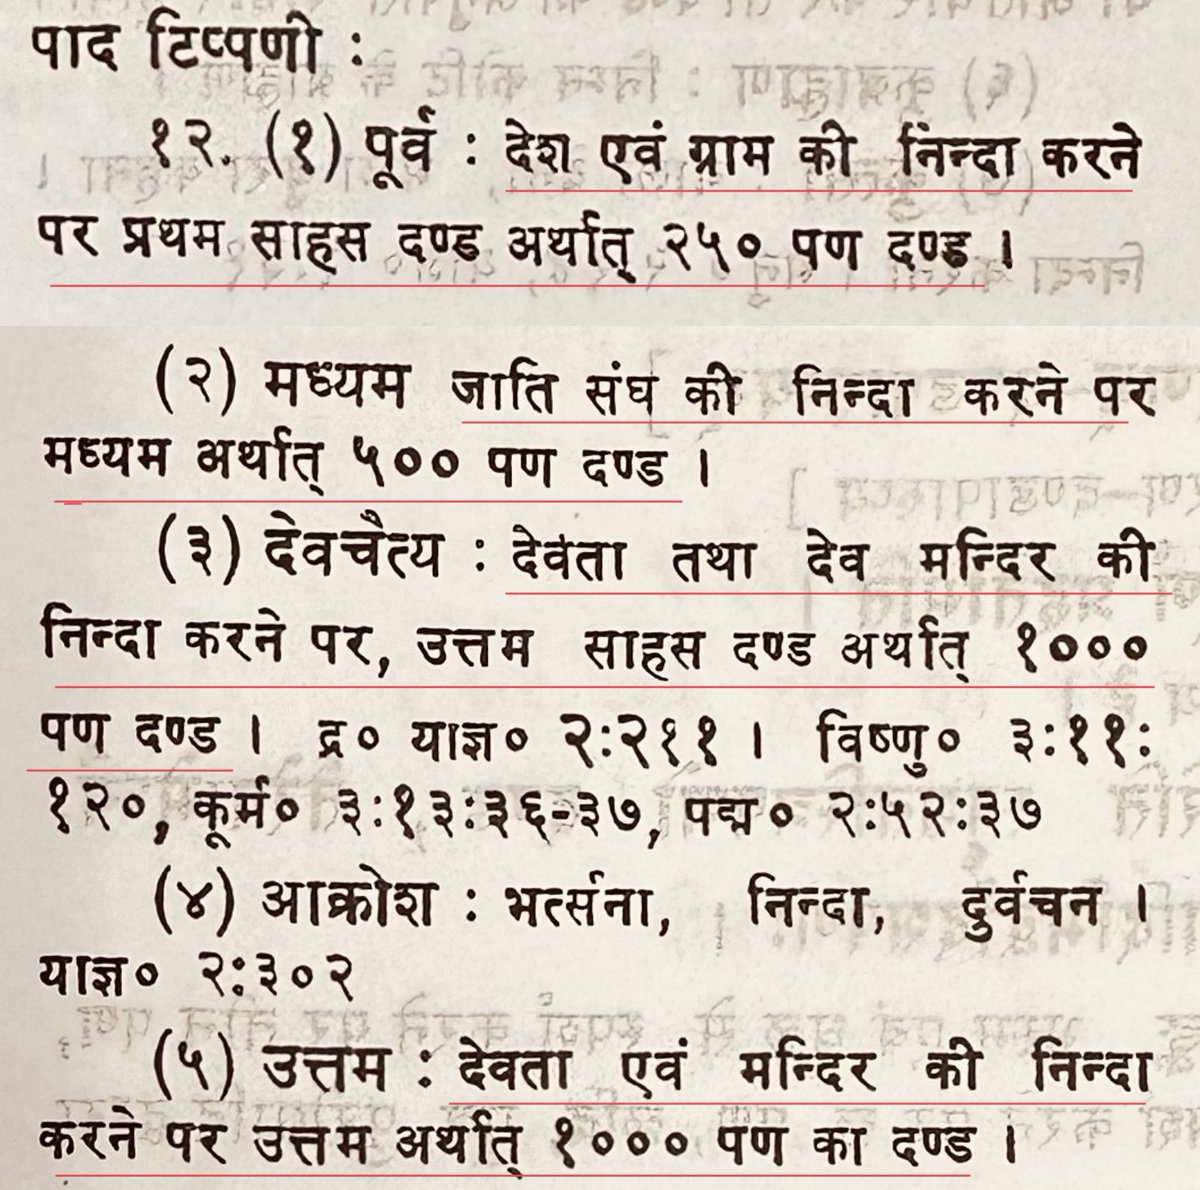 During Chanakya’s time, people didn’t have much use for those who abused their: - Country or city (fine ₹1.75 lakh) - Caste or guild (fine ₹3.5 lakh) - Deities or temples (fine ₹7 lakh) - #Arthashastra, 3.18.12 #Blasphemy #Abuse #StandUpComedy #Nationalism